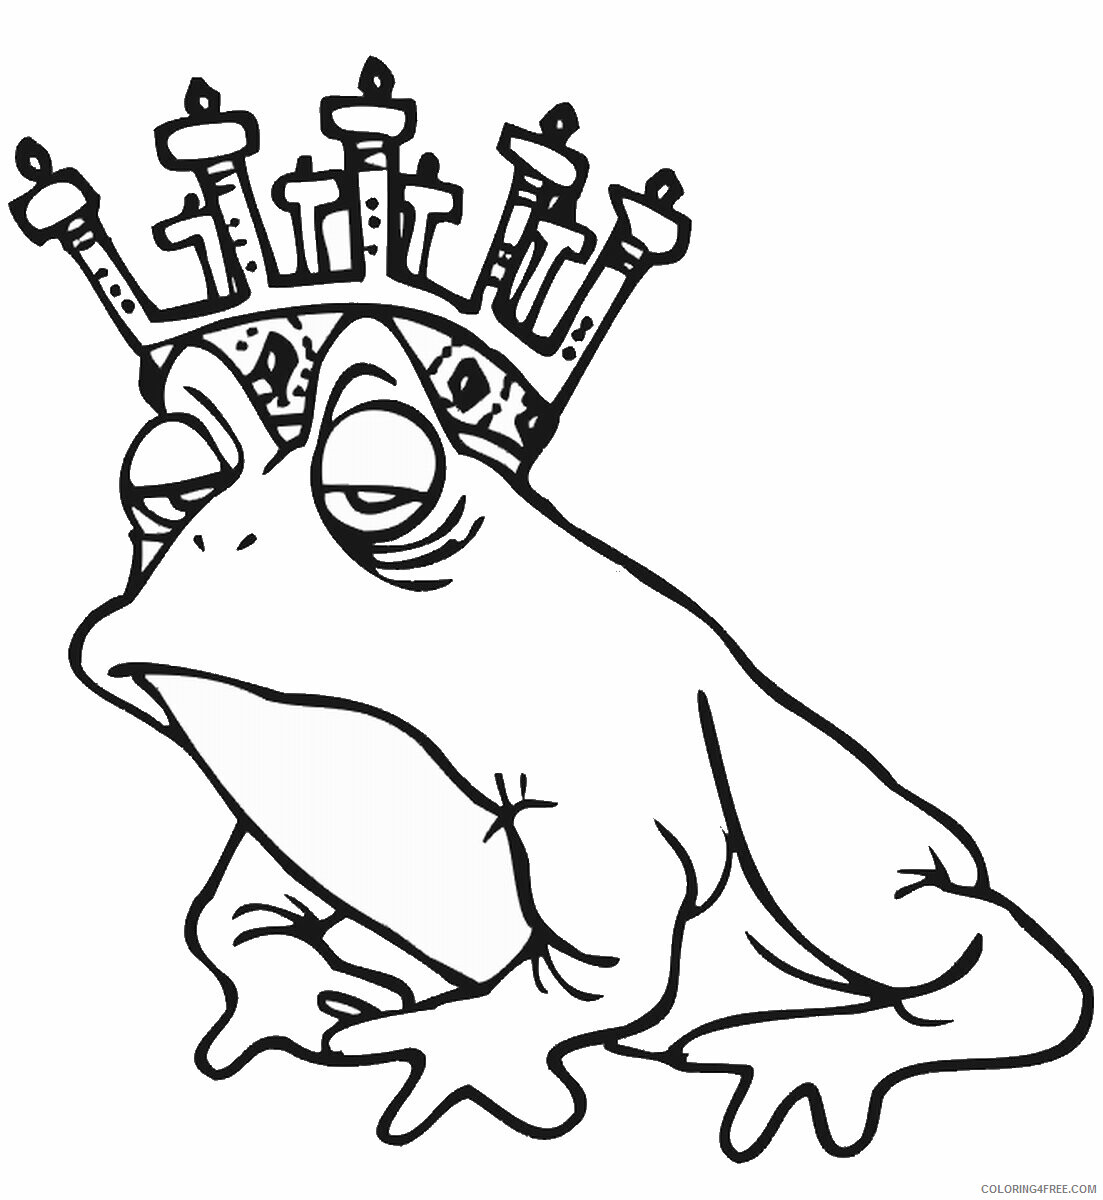 Frog Coloring Pages Animal Printable Sheets frog_cl_21 2021 2291 Coloring4free